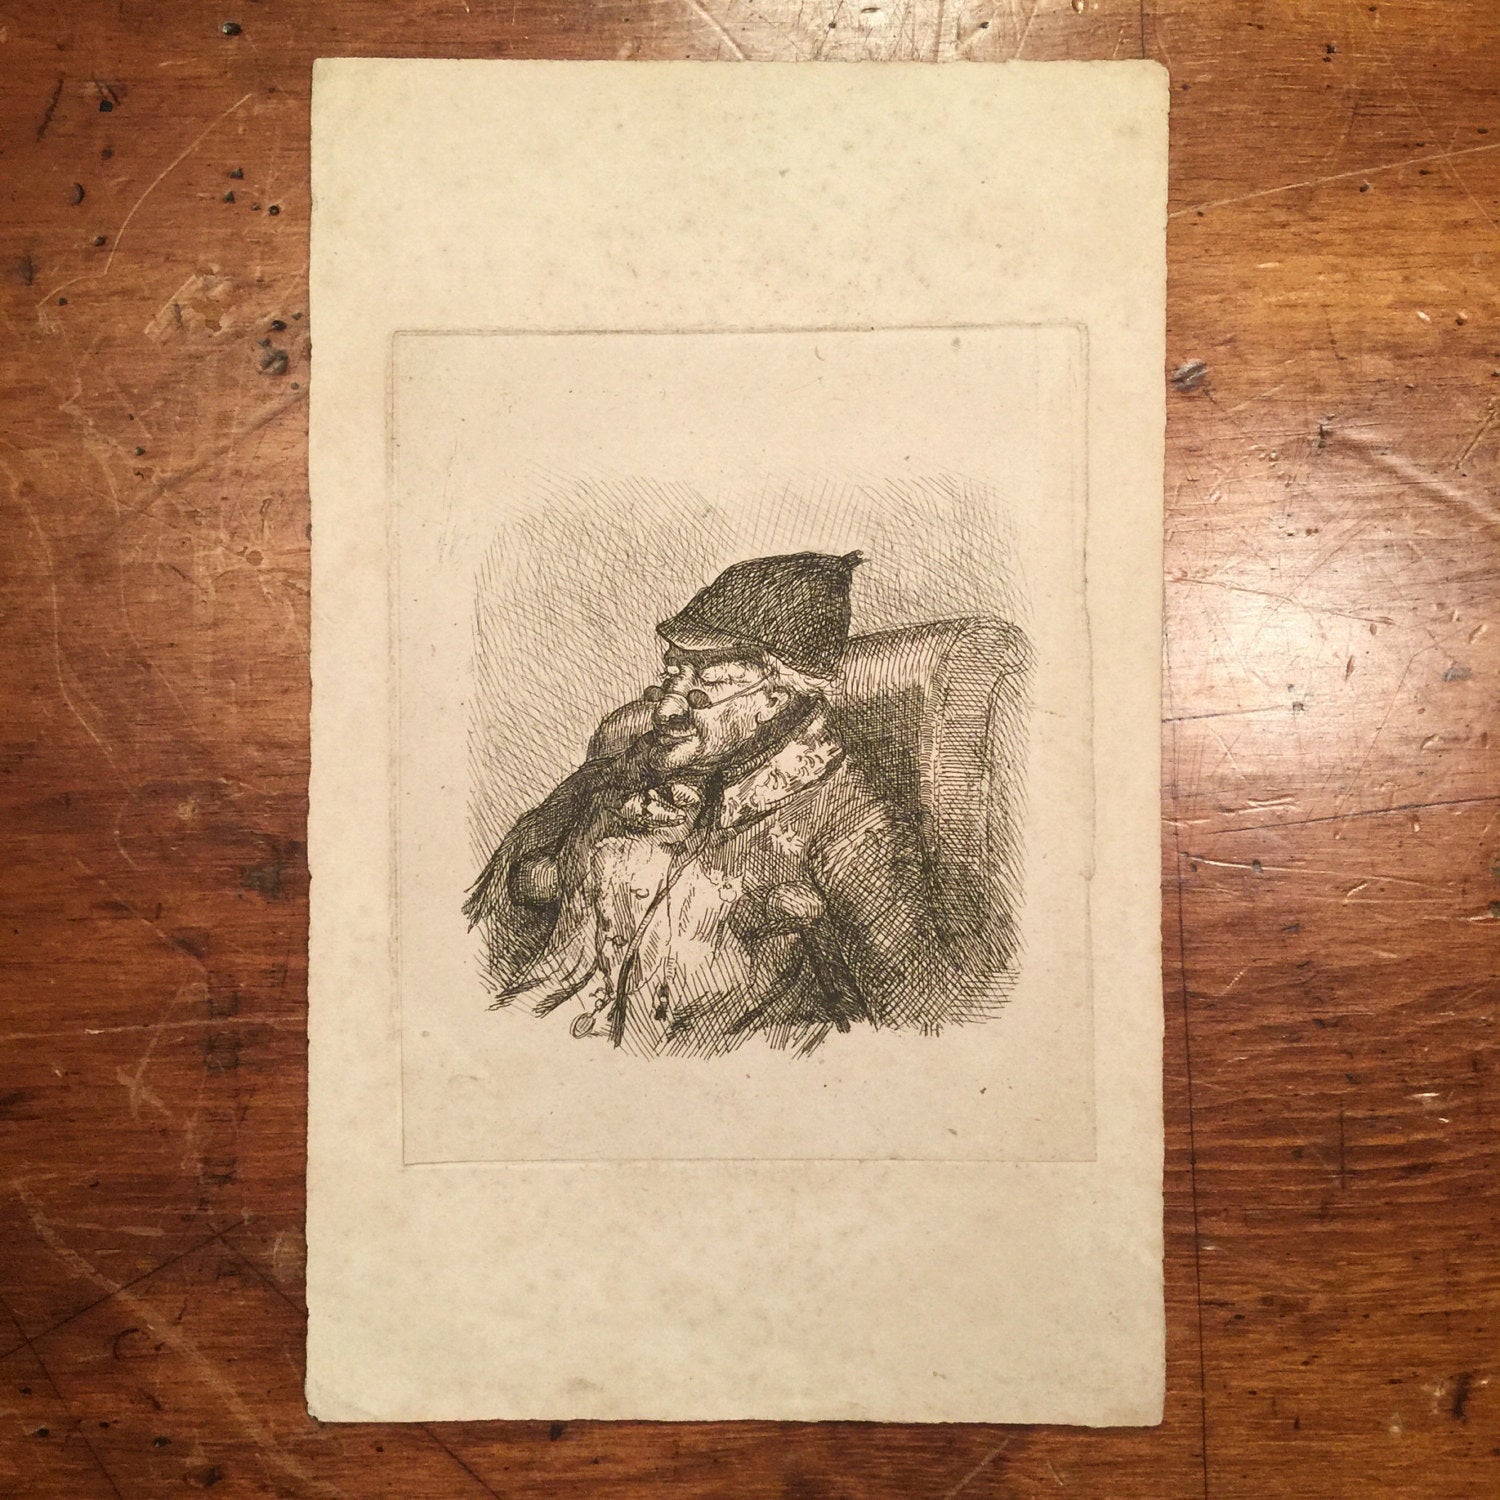 Early British Etching of Sleeping Man with Glasses - 1800s - Signed in plate "A.H." - Mystery Artist